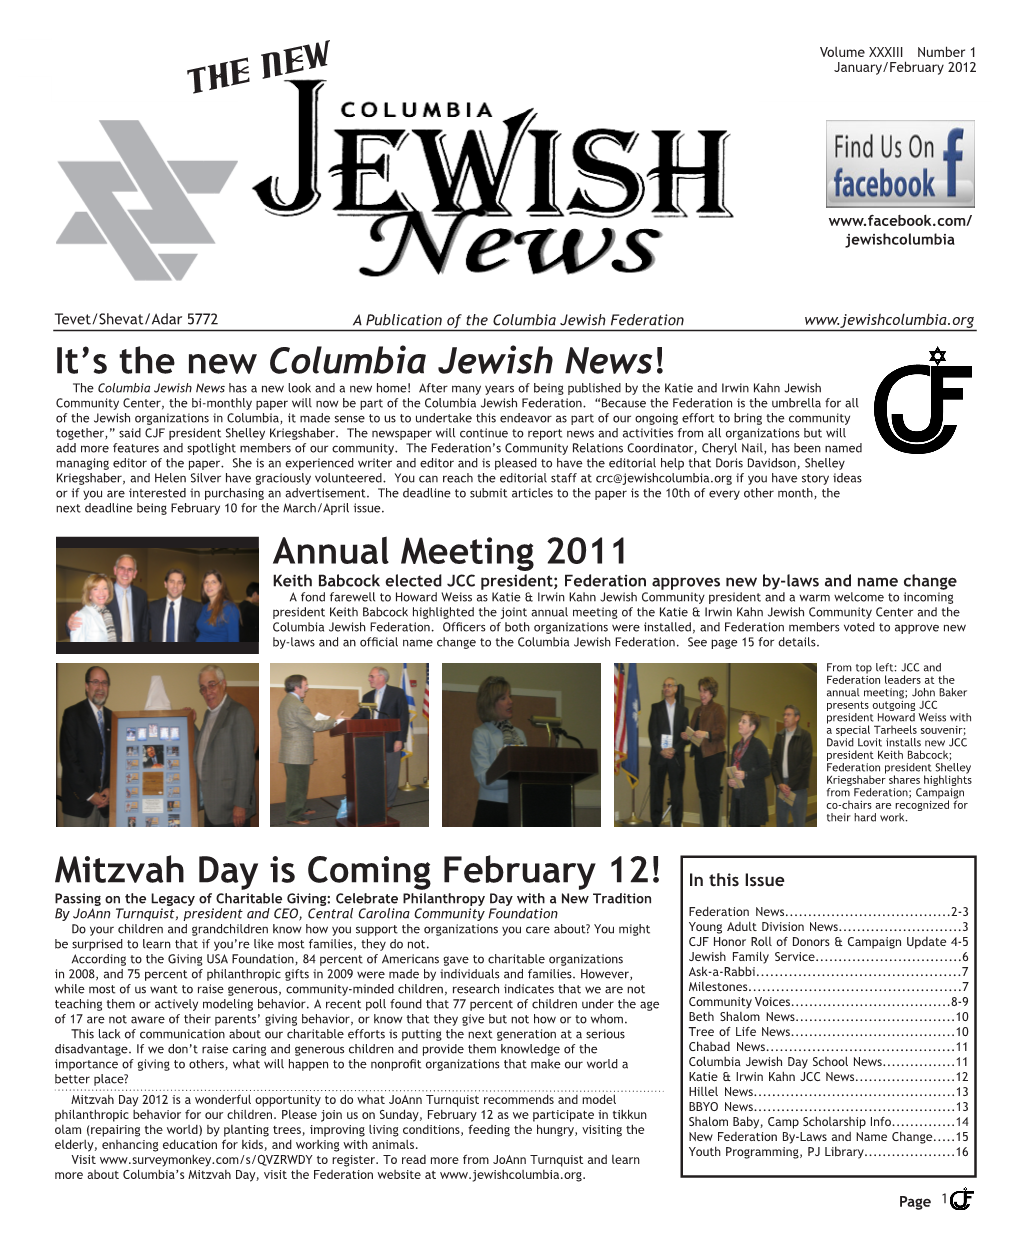 It's the New Columbia Jewish News! Annual Meeting 2011 Mitzvah Day